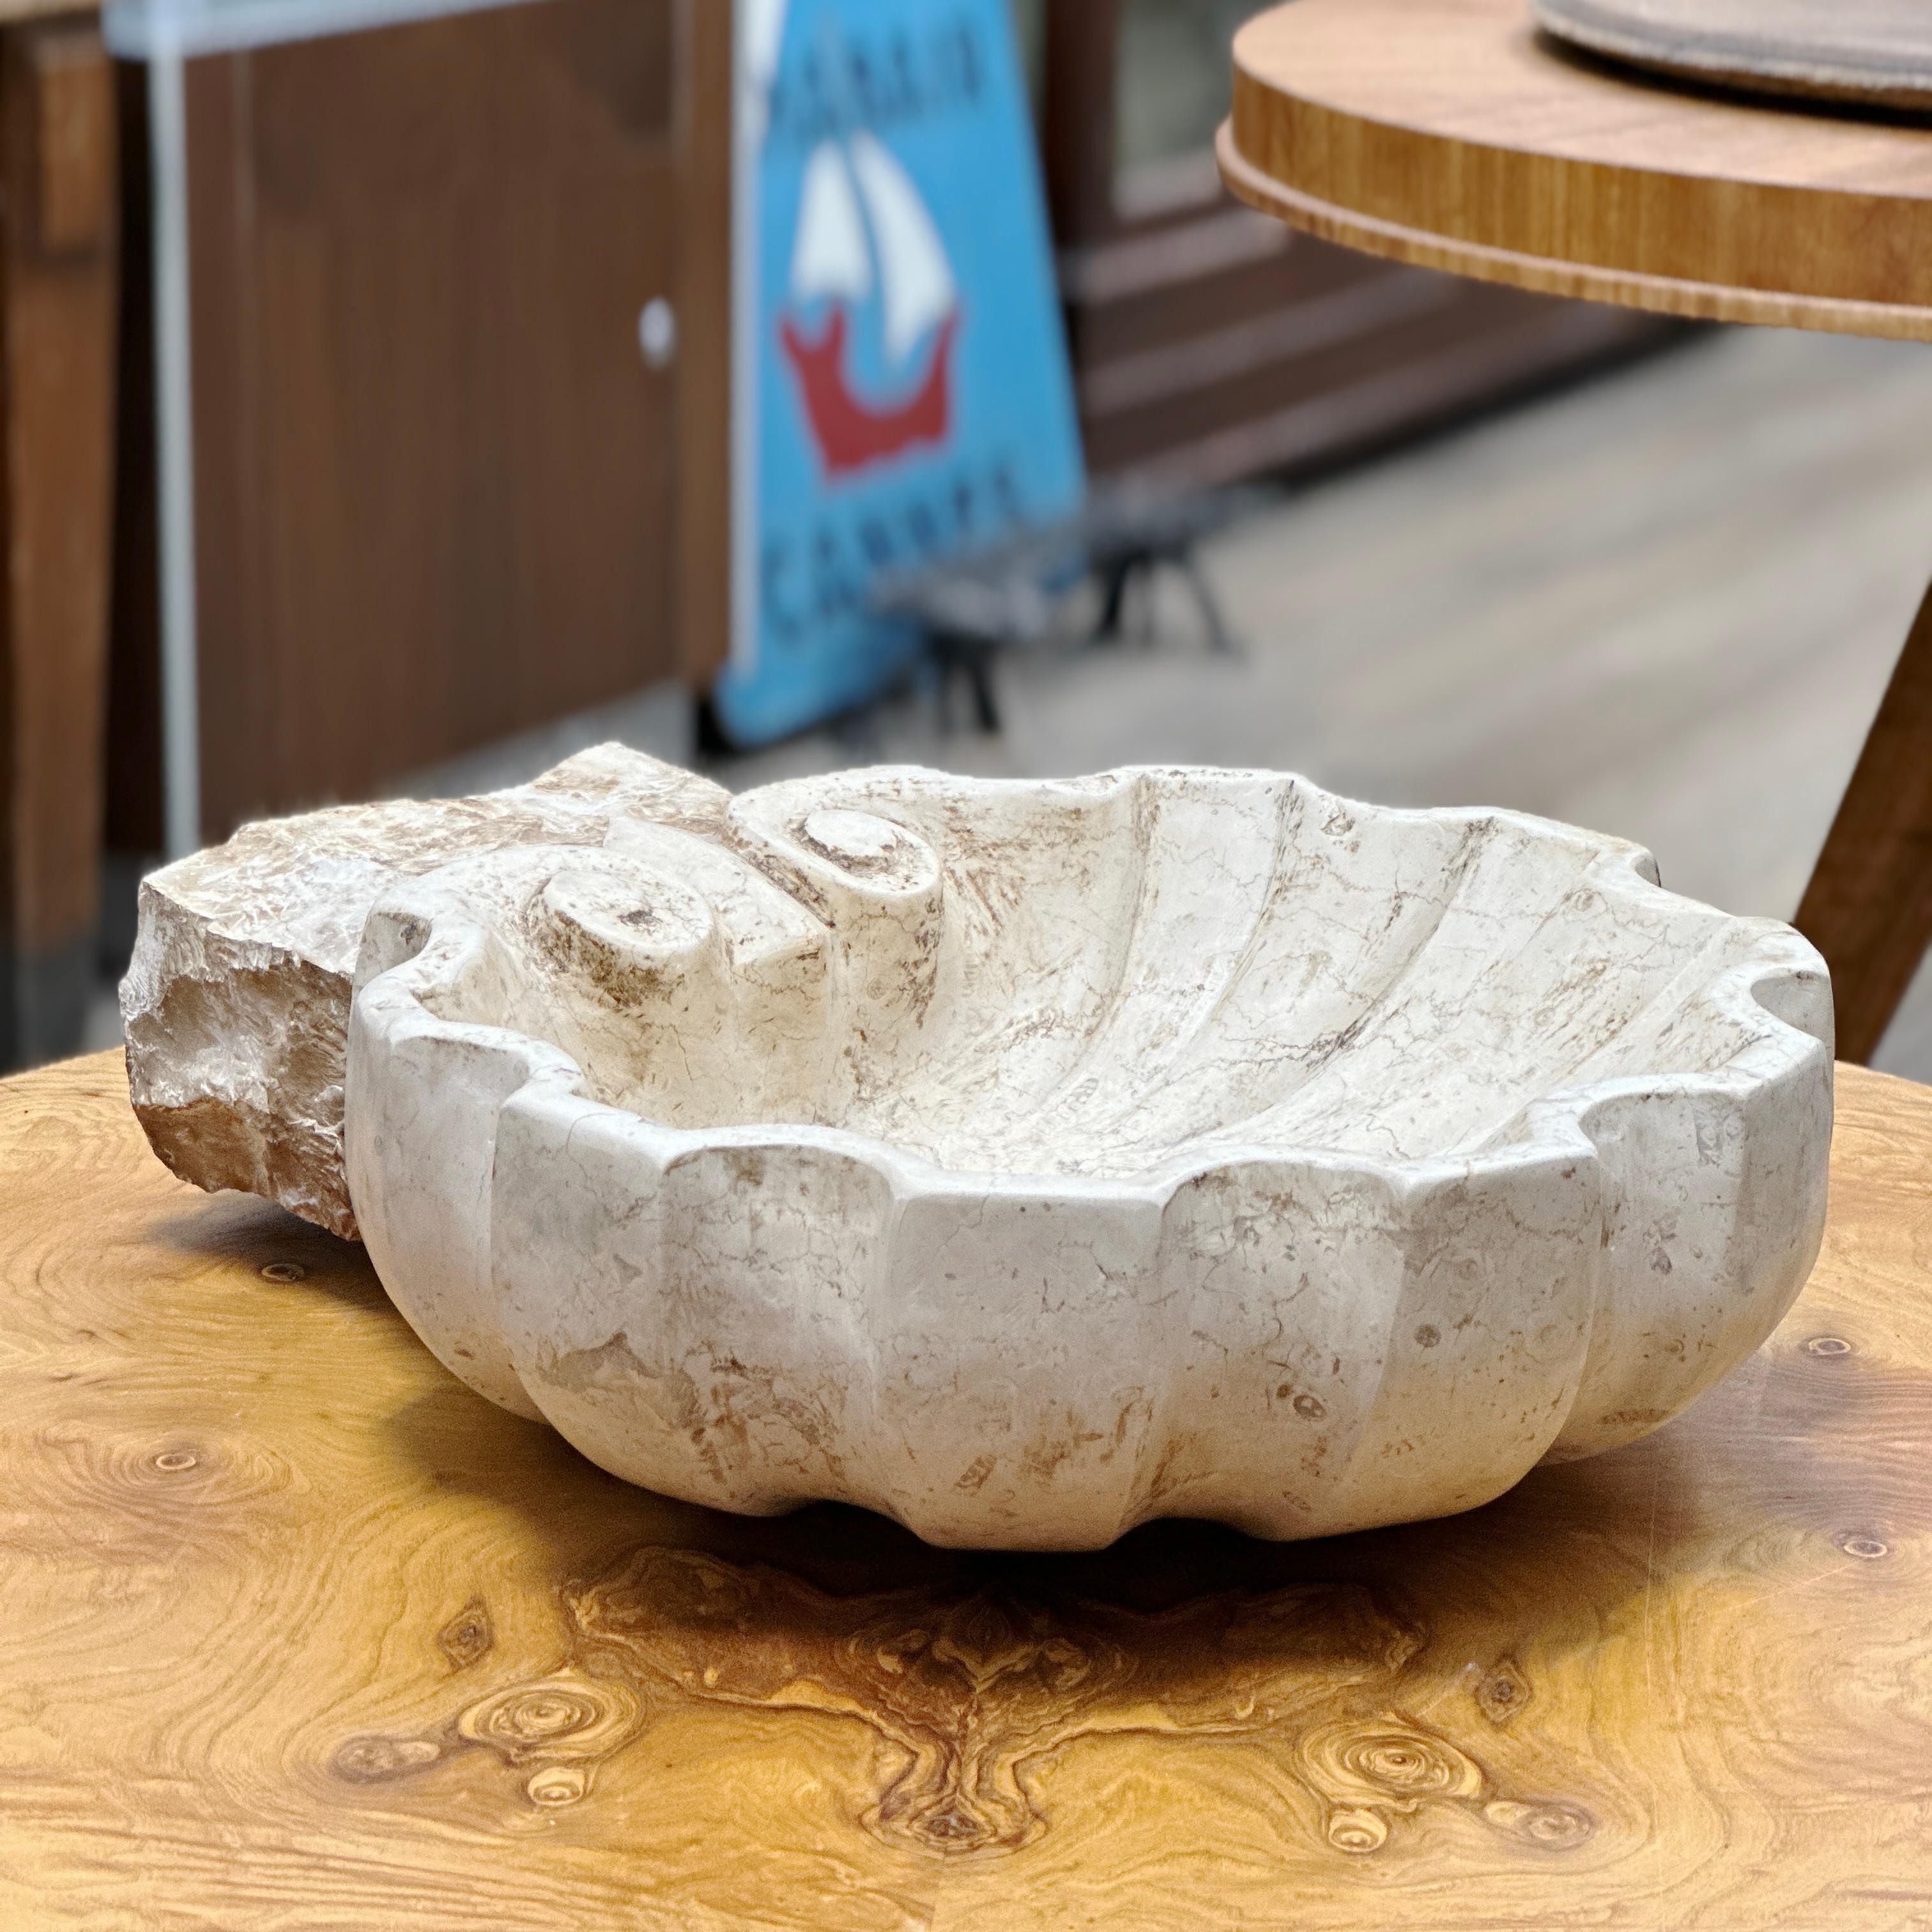 Here is a beautiful Shell Shaped Italian Marble Holy Water Stoup. Made completely by hand, this holy water stoup is made from a single block of Italian marble. It can be used as a fountain basin, a holder for keys, jewelry etc…or as an interior